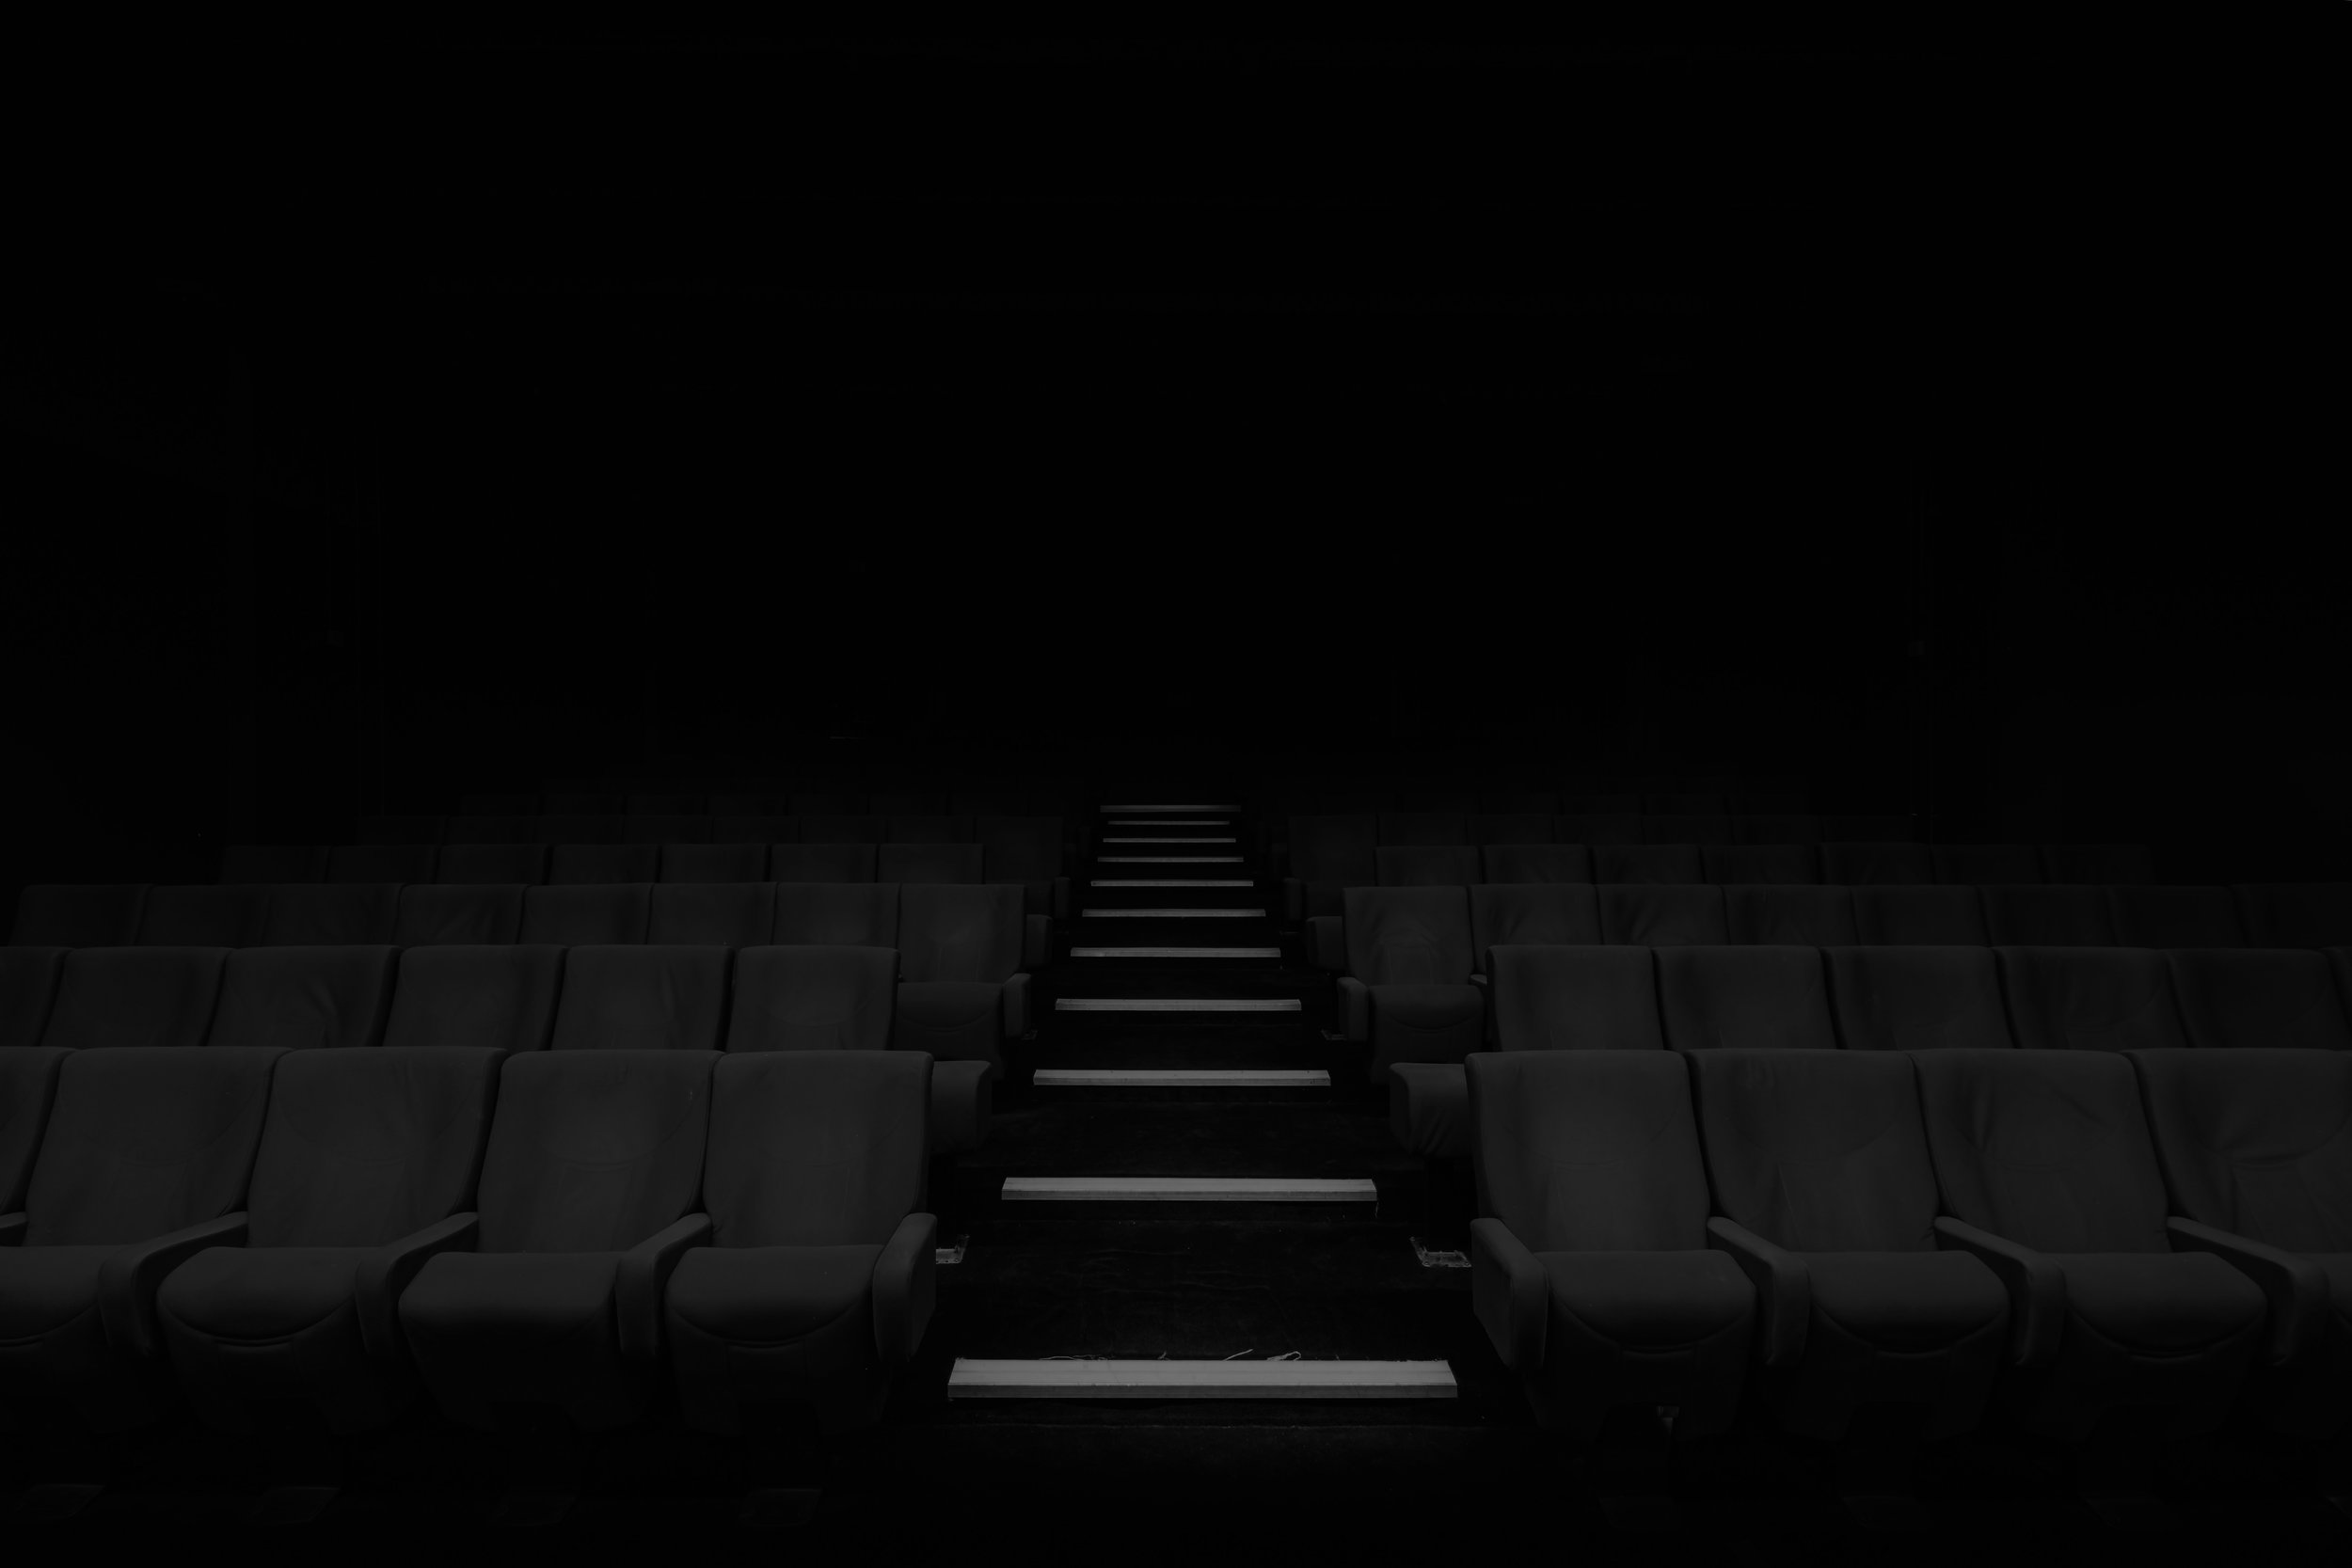 Simple Background Black Background Minimalism Theater Photography Chair Stairs Dark 2500x1667